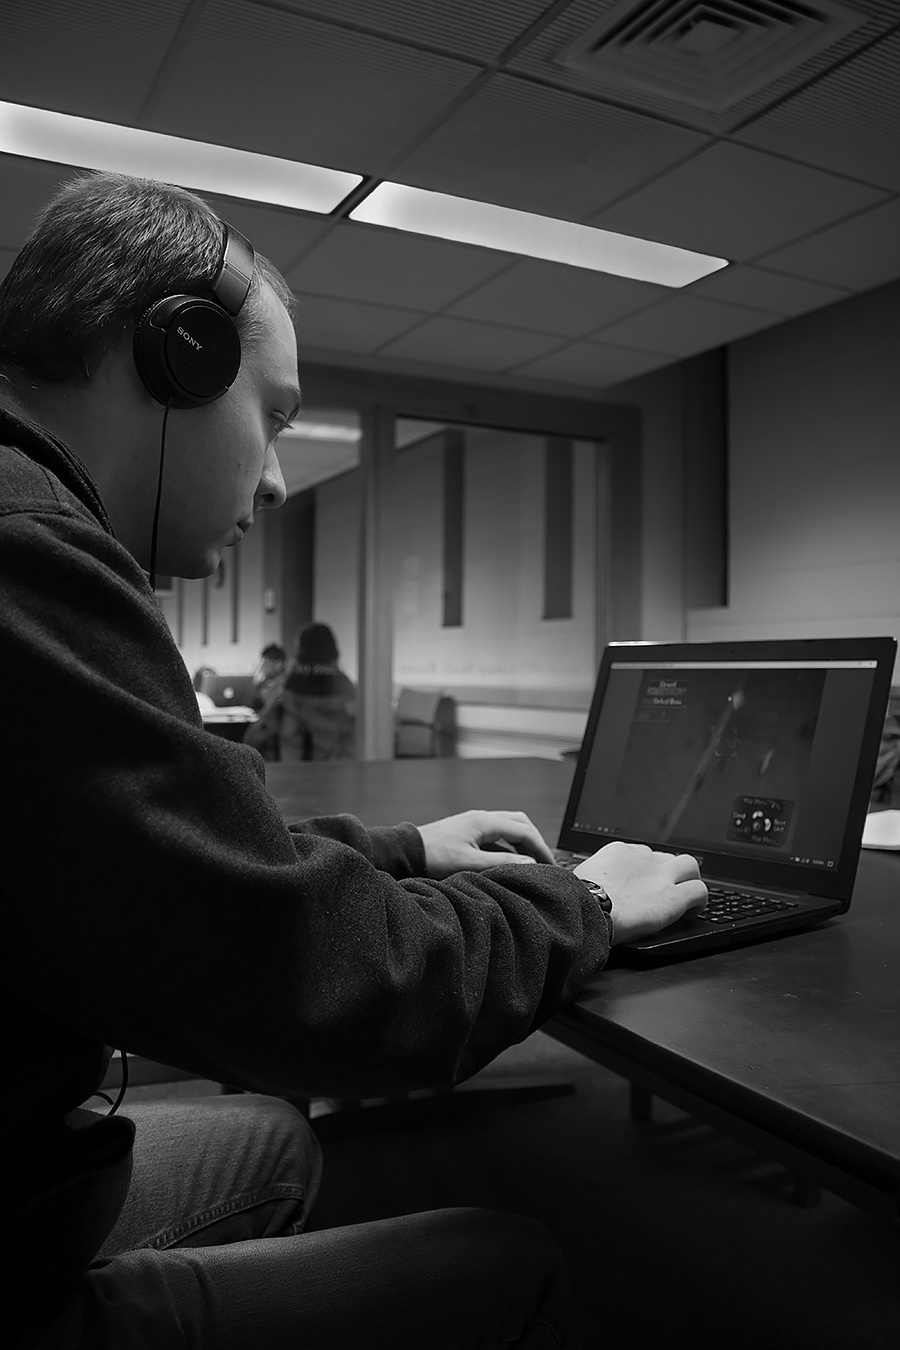 Tyler_Ling_photography_library_computers_headphones_absorbed_gaming_chemistry_Matthew_Eernisse_Penn_sideshot_unaware_black_white